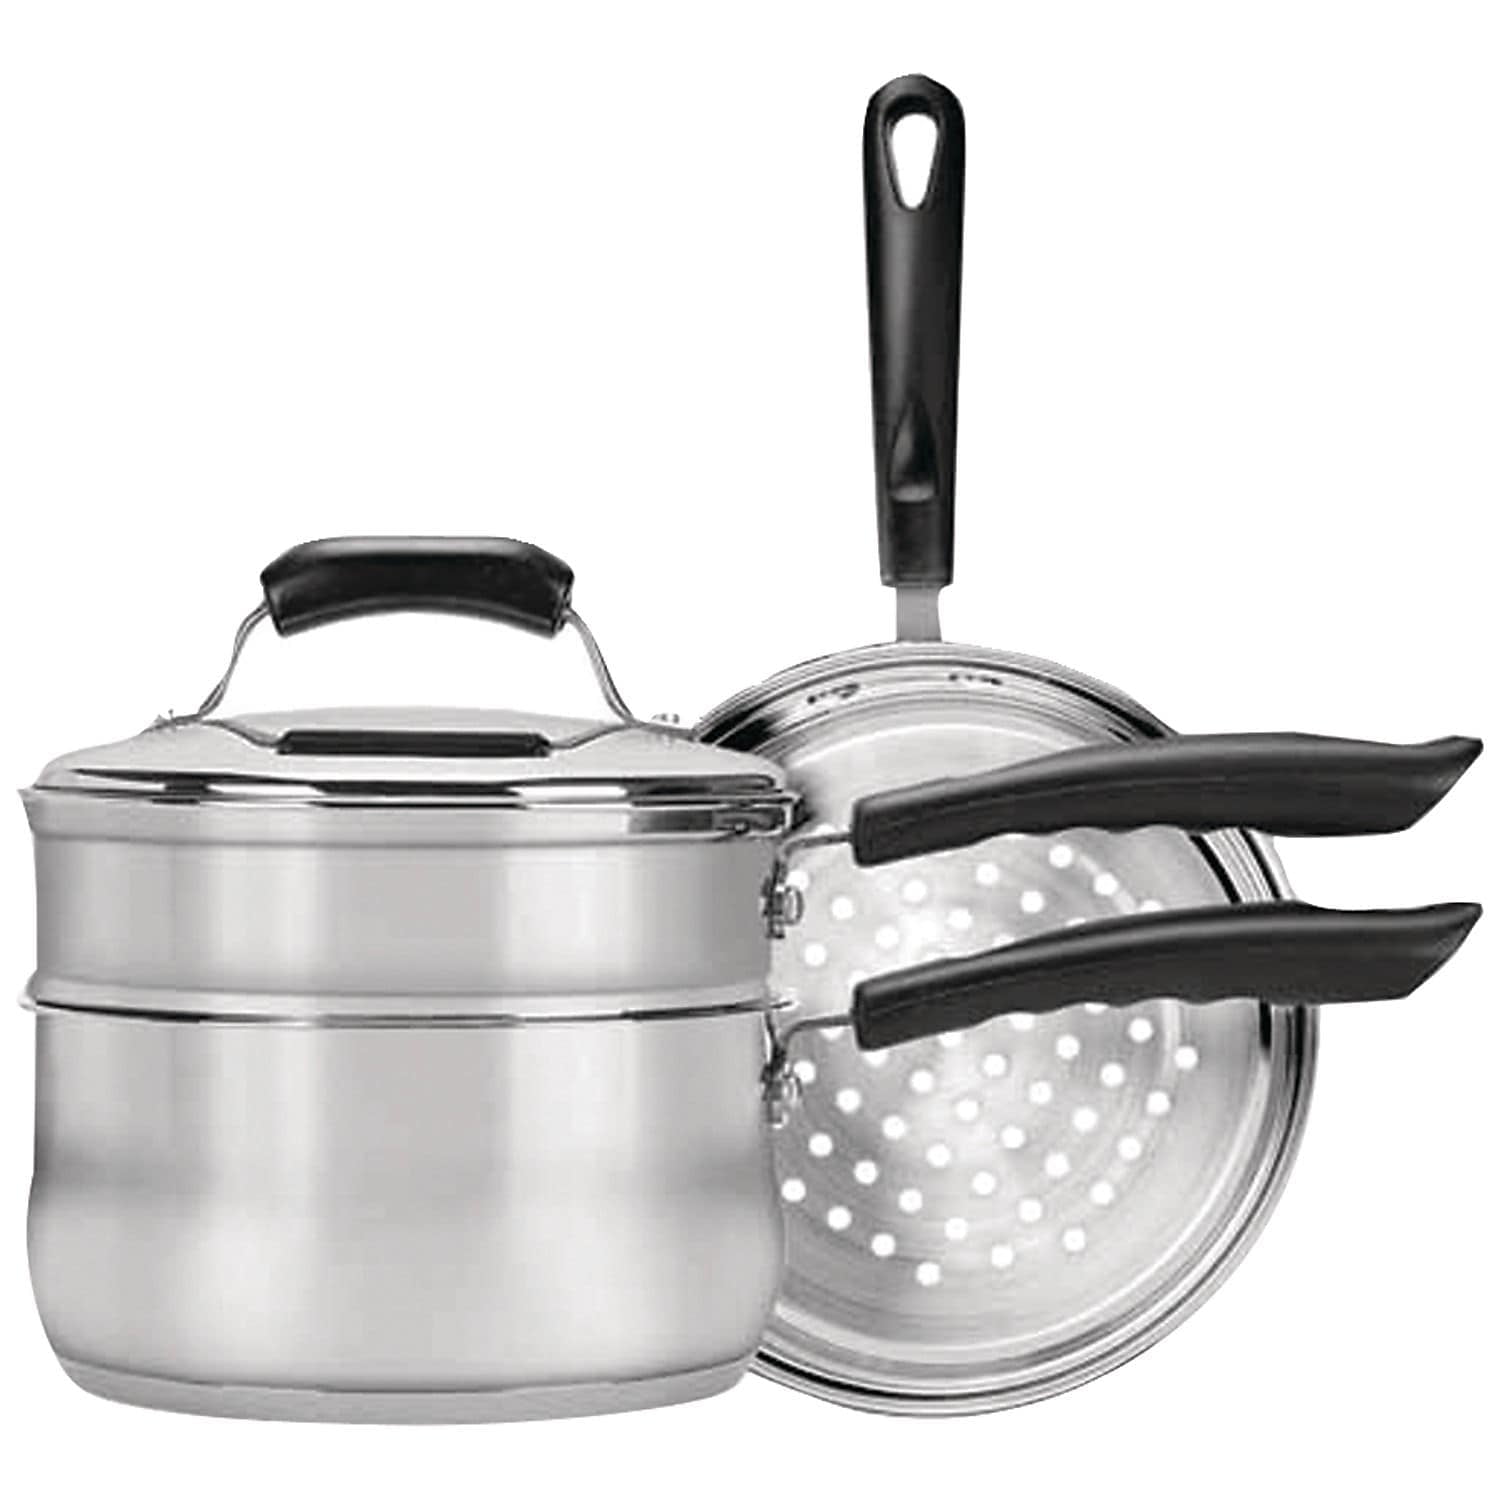 Stainless steel steamer recommended ·ASD three-layer double bottom steamer  with high capacity, no smell and easy storage